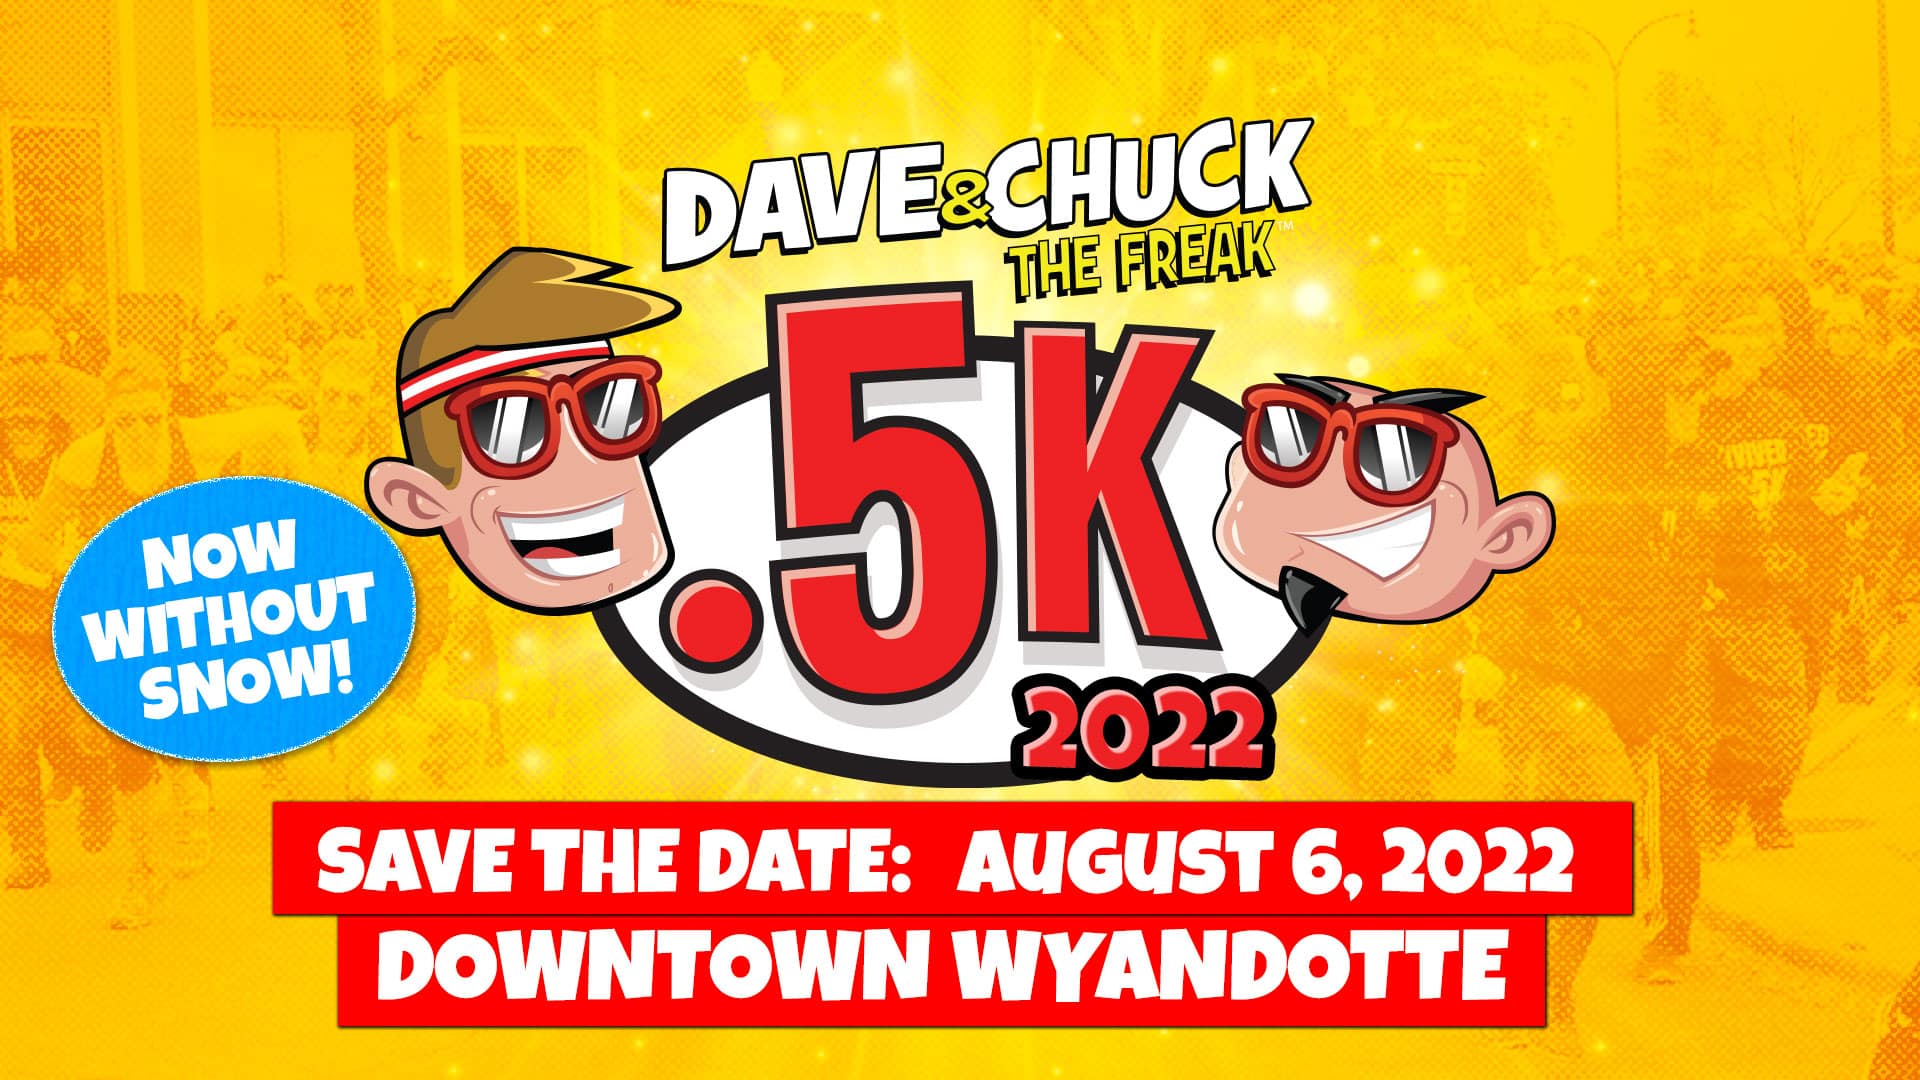 Dave & Chuck the Freak .5K 2022 – Save the Date: August 6, 2022 in Downtown Wyandotte. Now without snow!